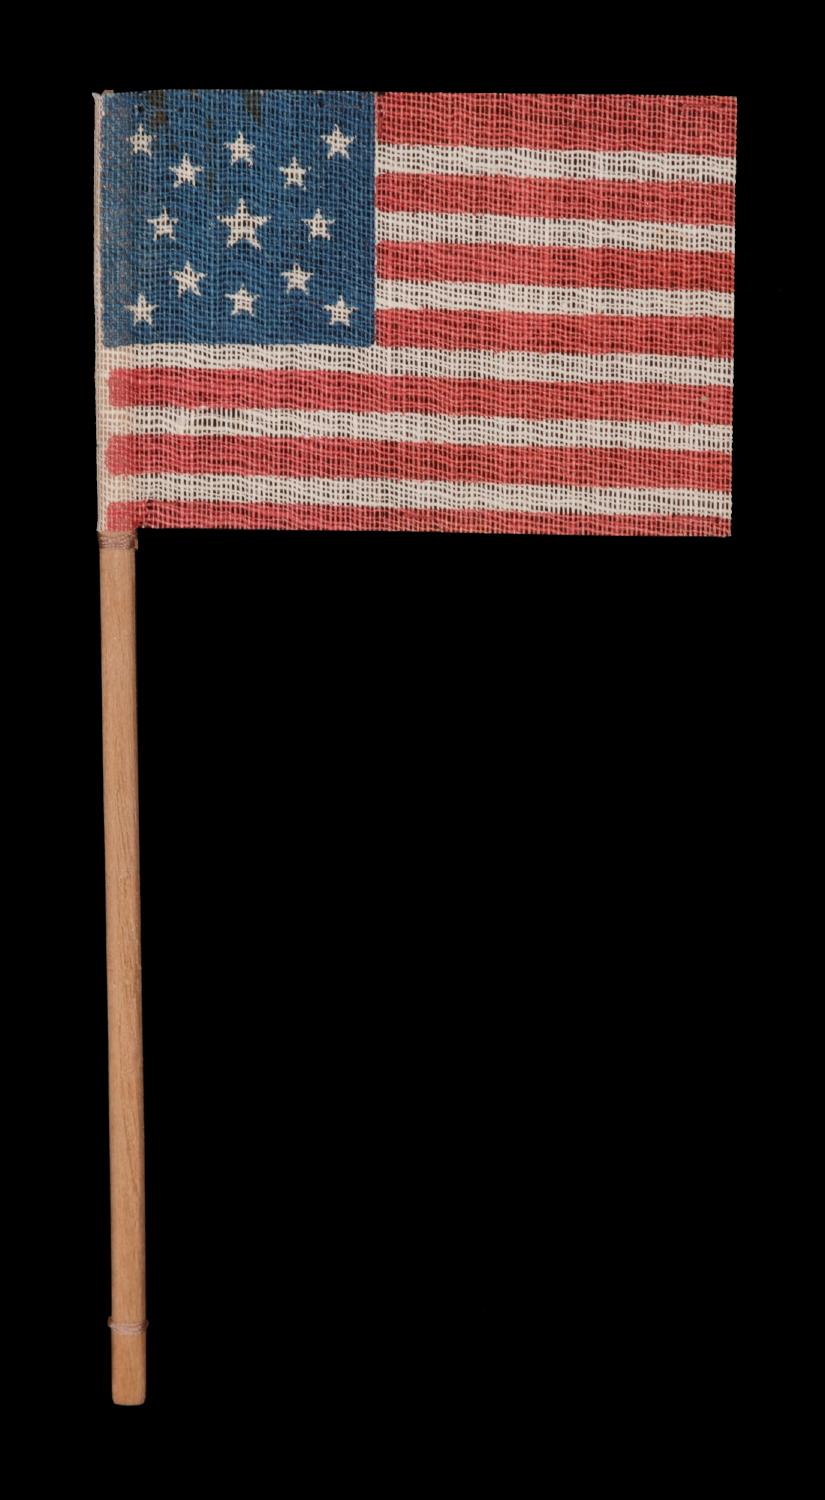 13 stars in a medallion pattern on an antique American parade flag made for the 1876 Centennial Celebration

13 star American national parade flag, printed on coarse, glazed cotton and affixed to its original staff. Made to celebrate our nation’s